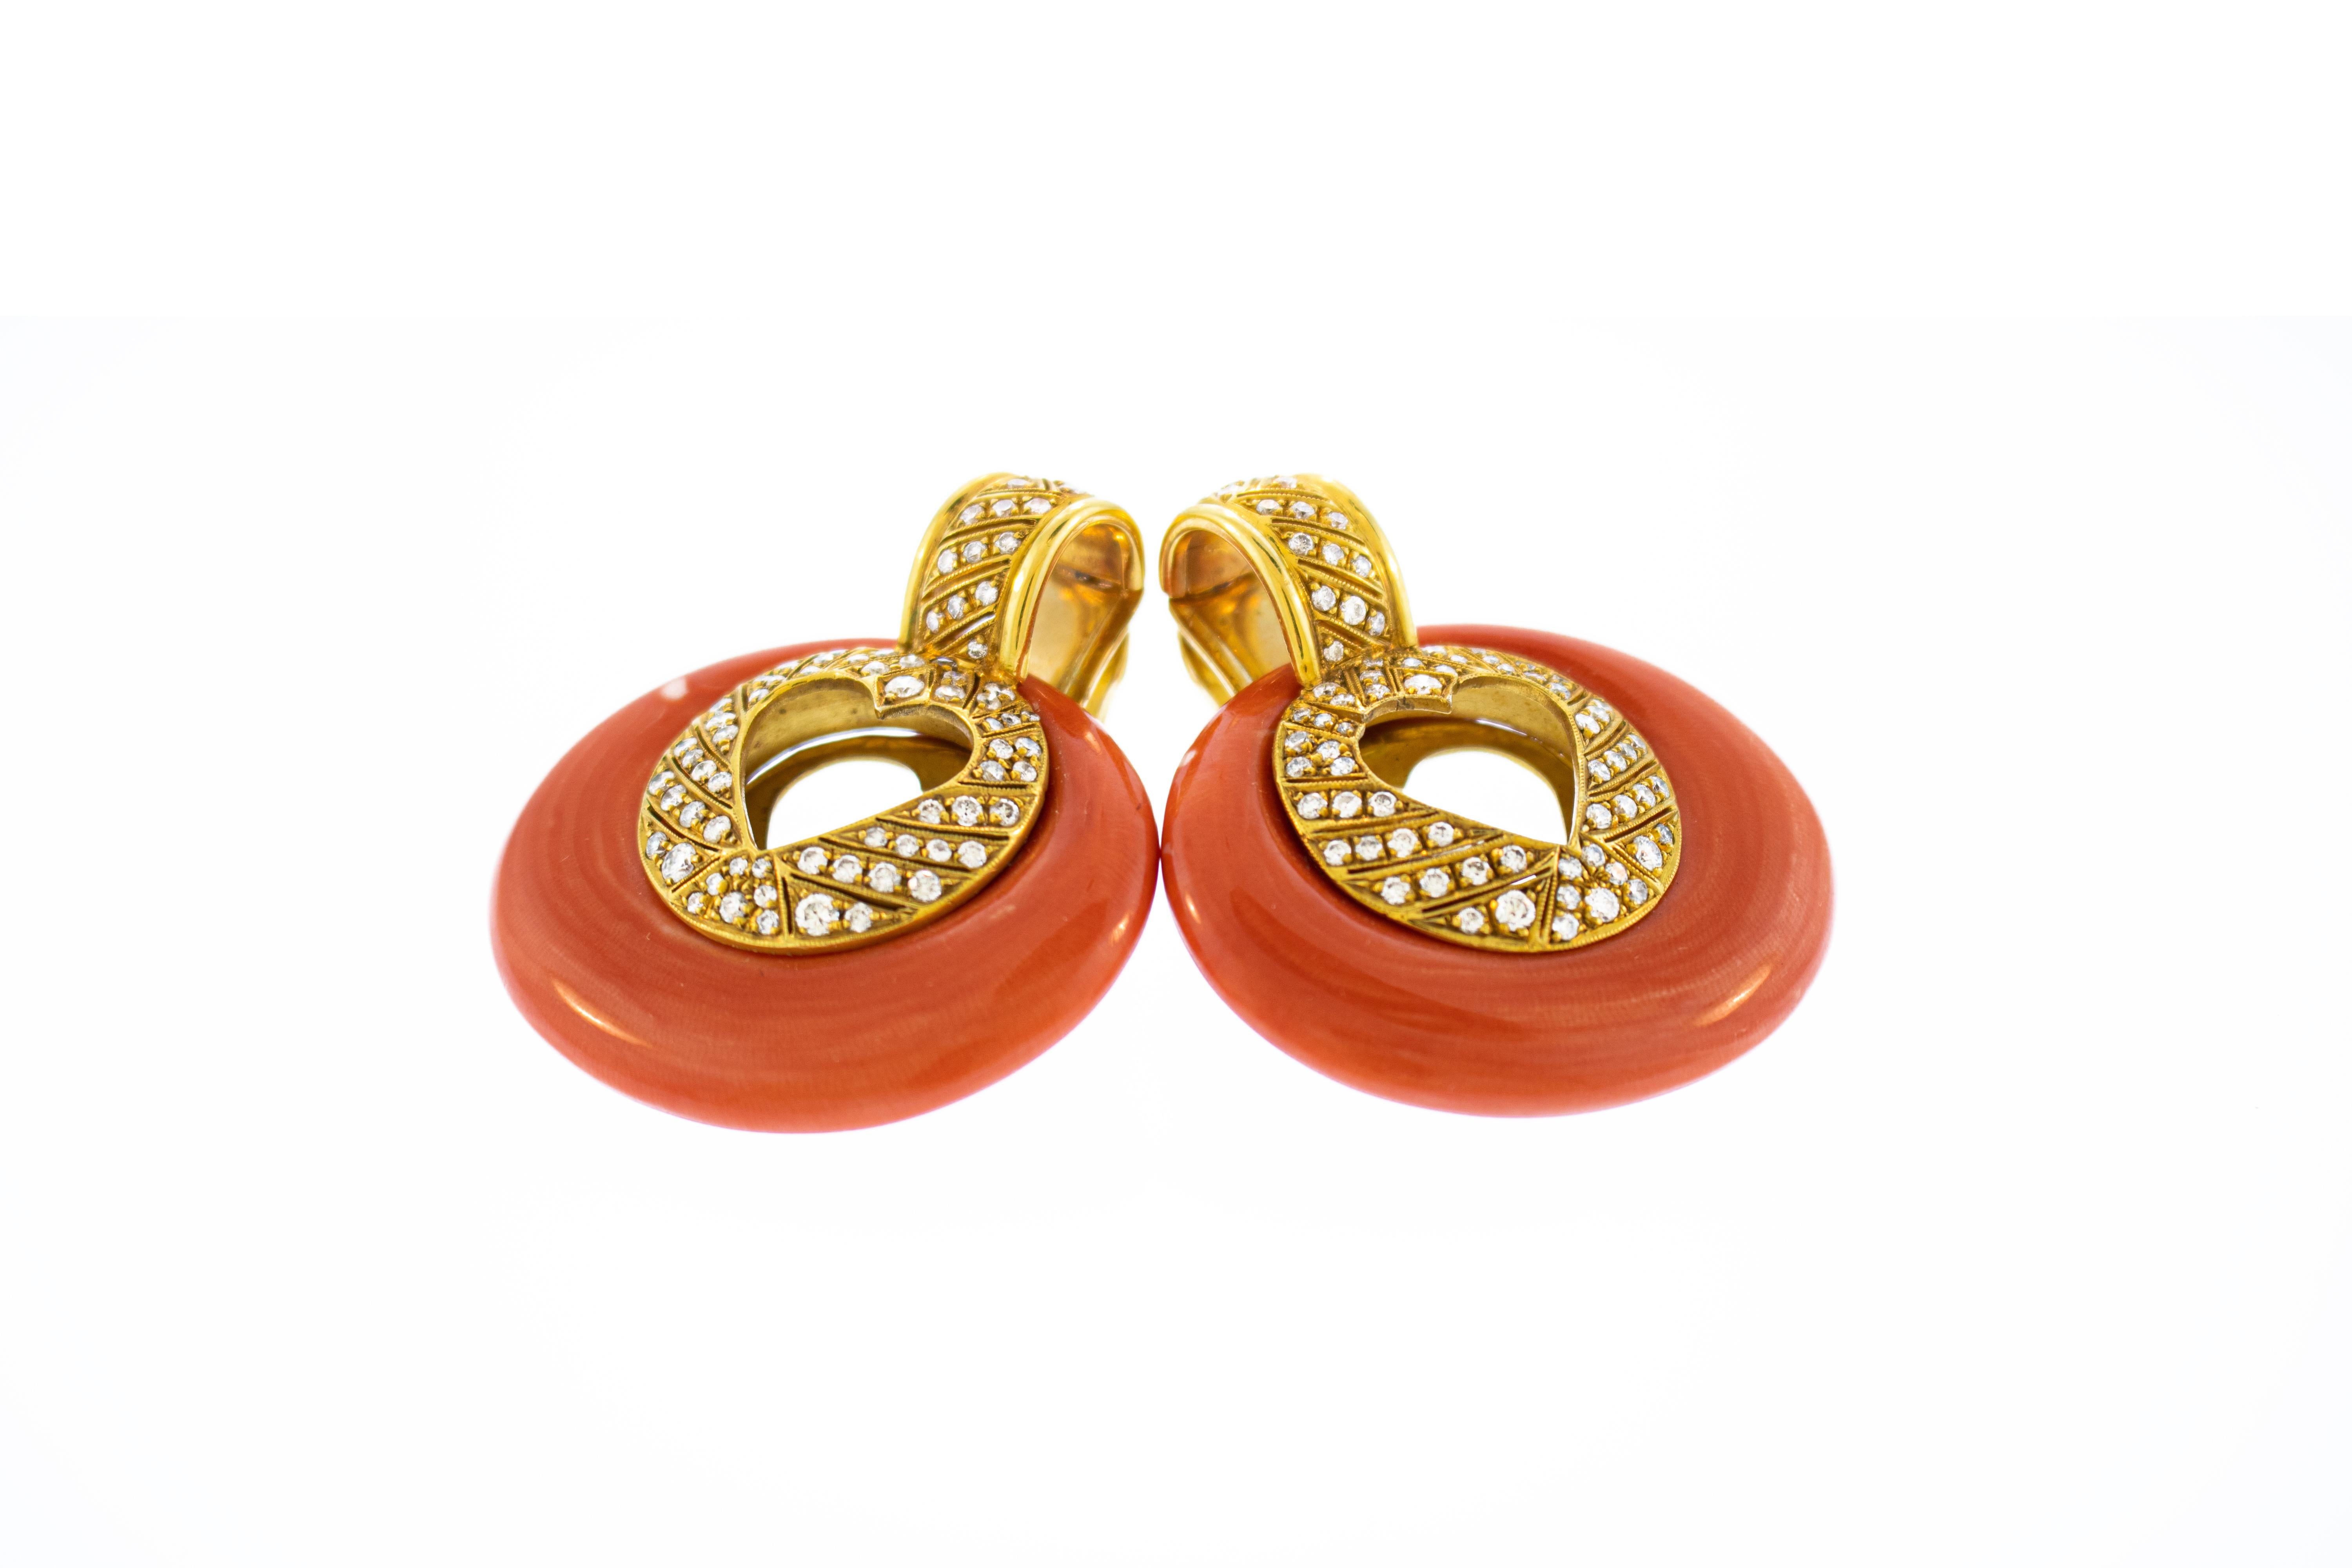 Beautiful 18k gold red coral and diamond earrings. Total weight of 54 grams. total carat weight of the diamonds is approximately 3 carats